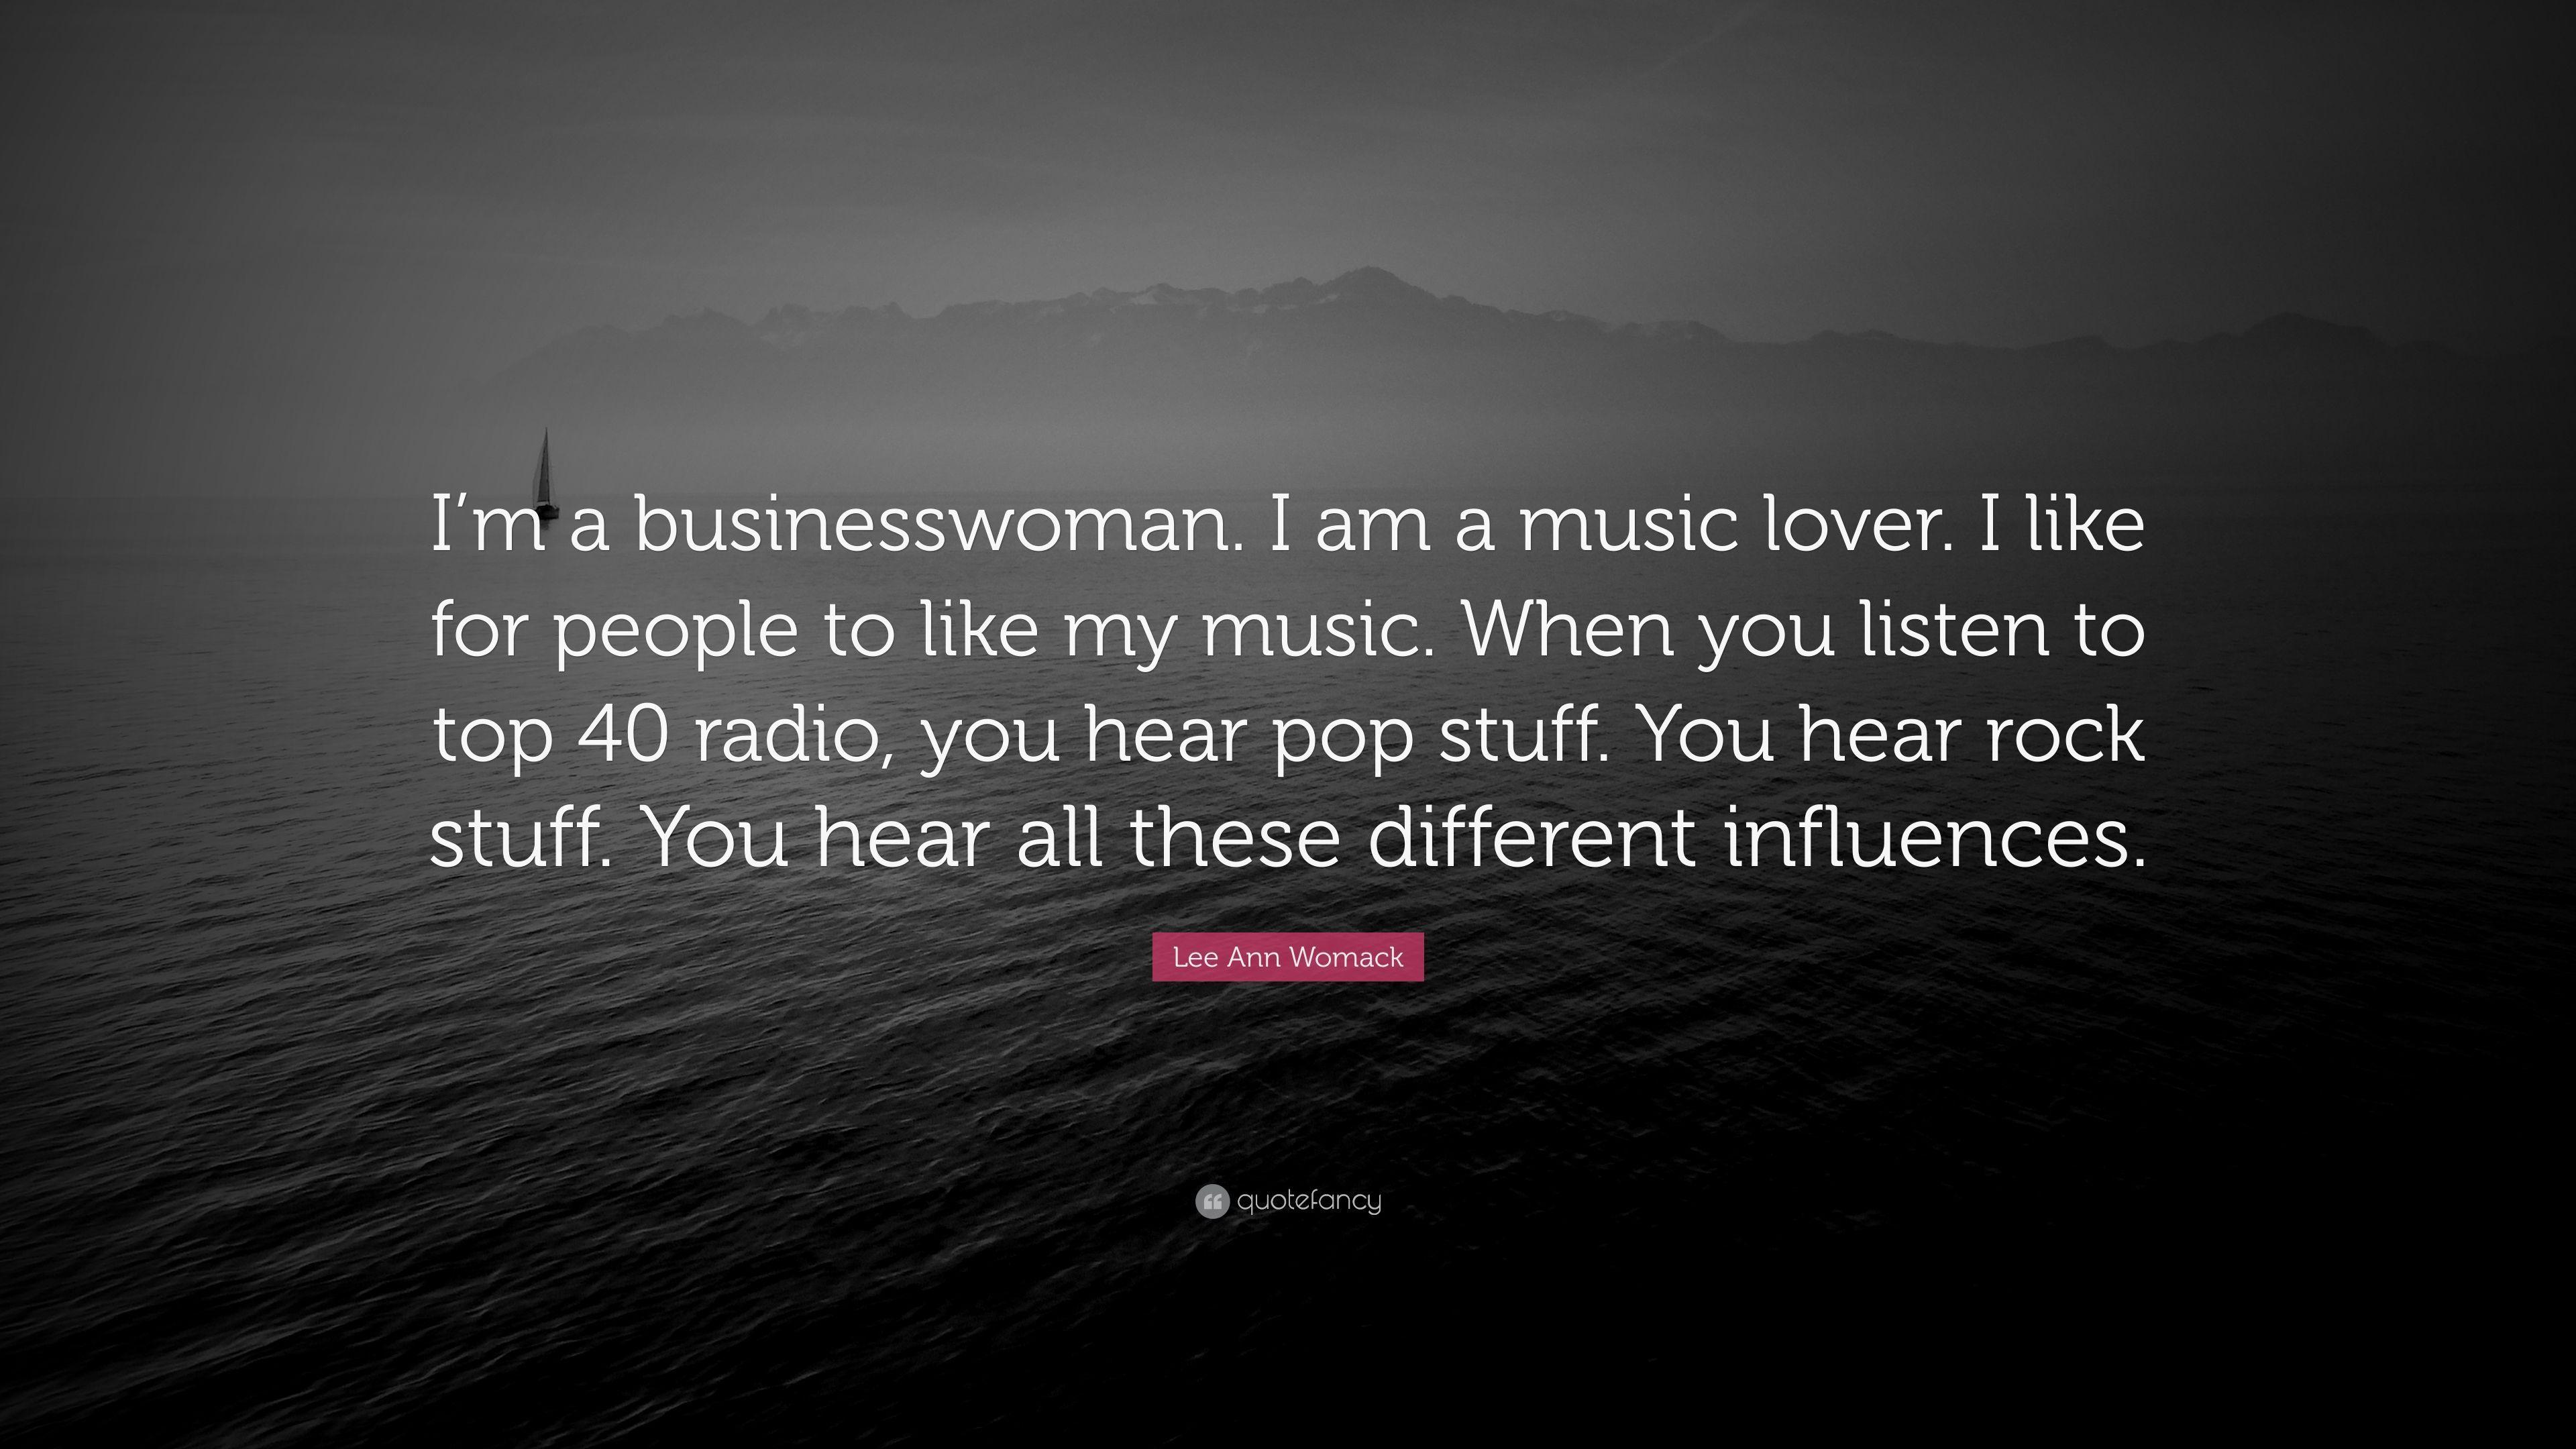 Lee Ann Womack Quote: “I'm a businesswoman. I am a music lover. I